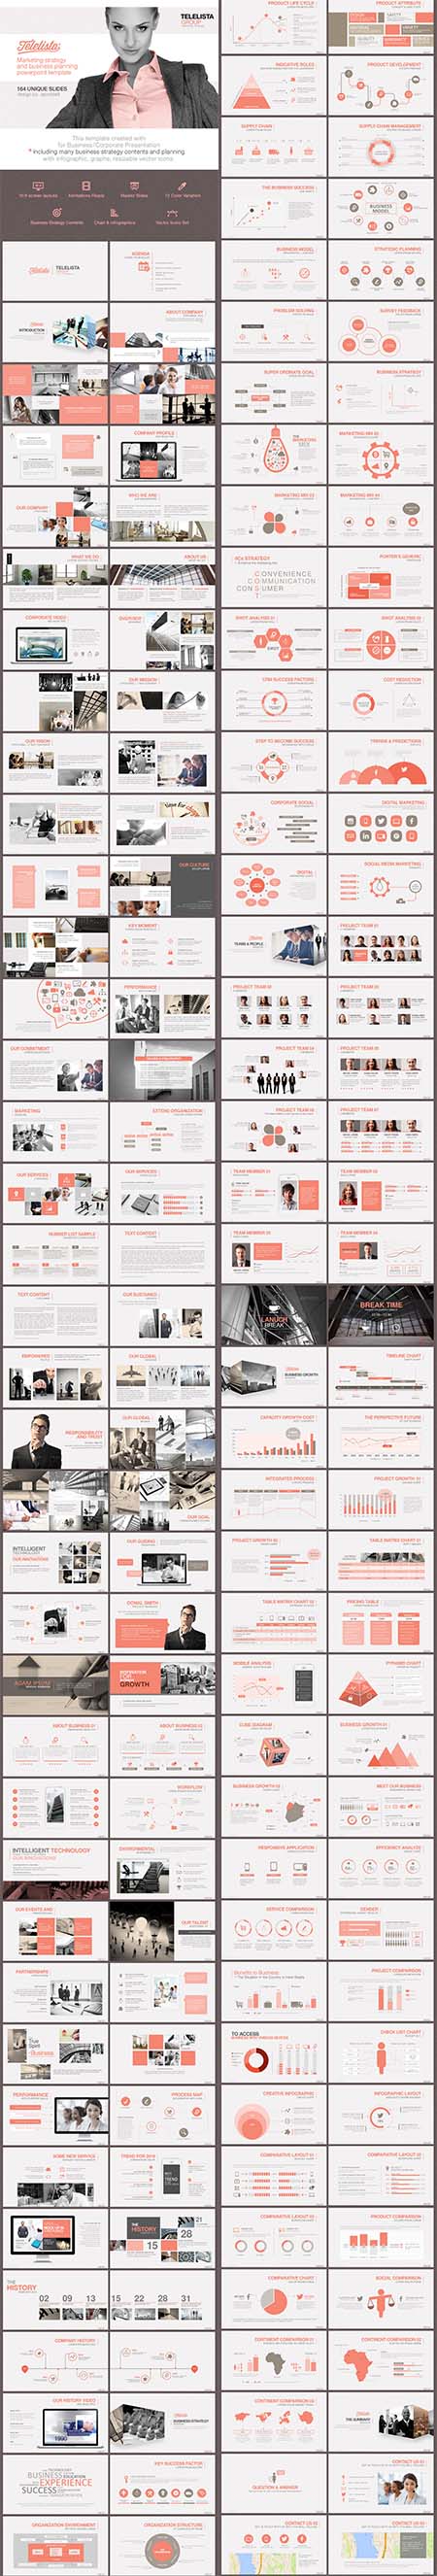 GraphicRiver - Telelista - Business Strategy PowerPoint 10701918